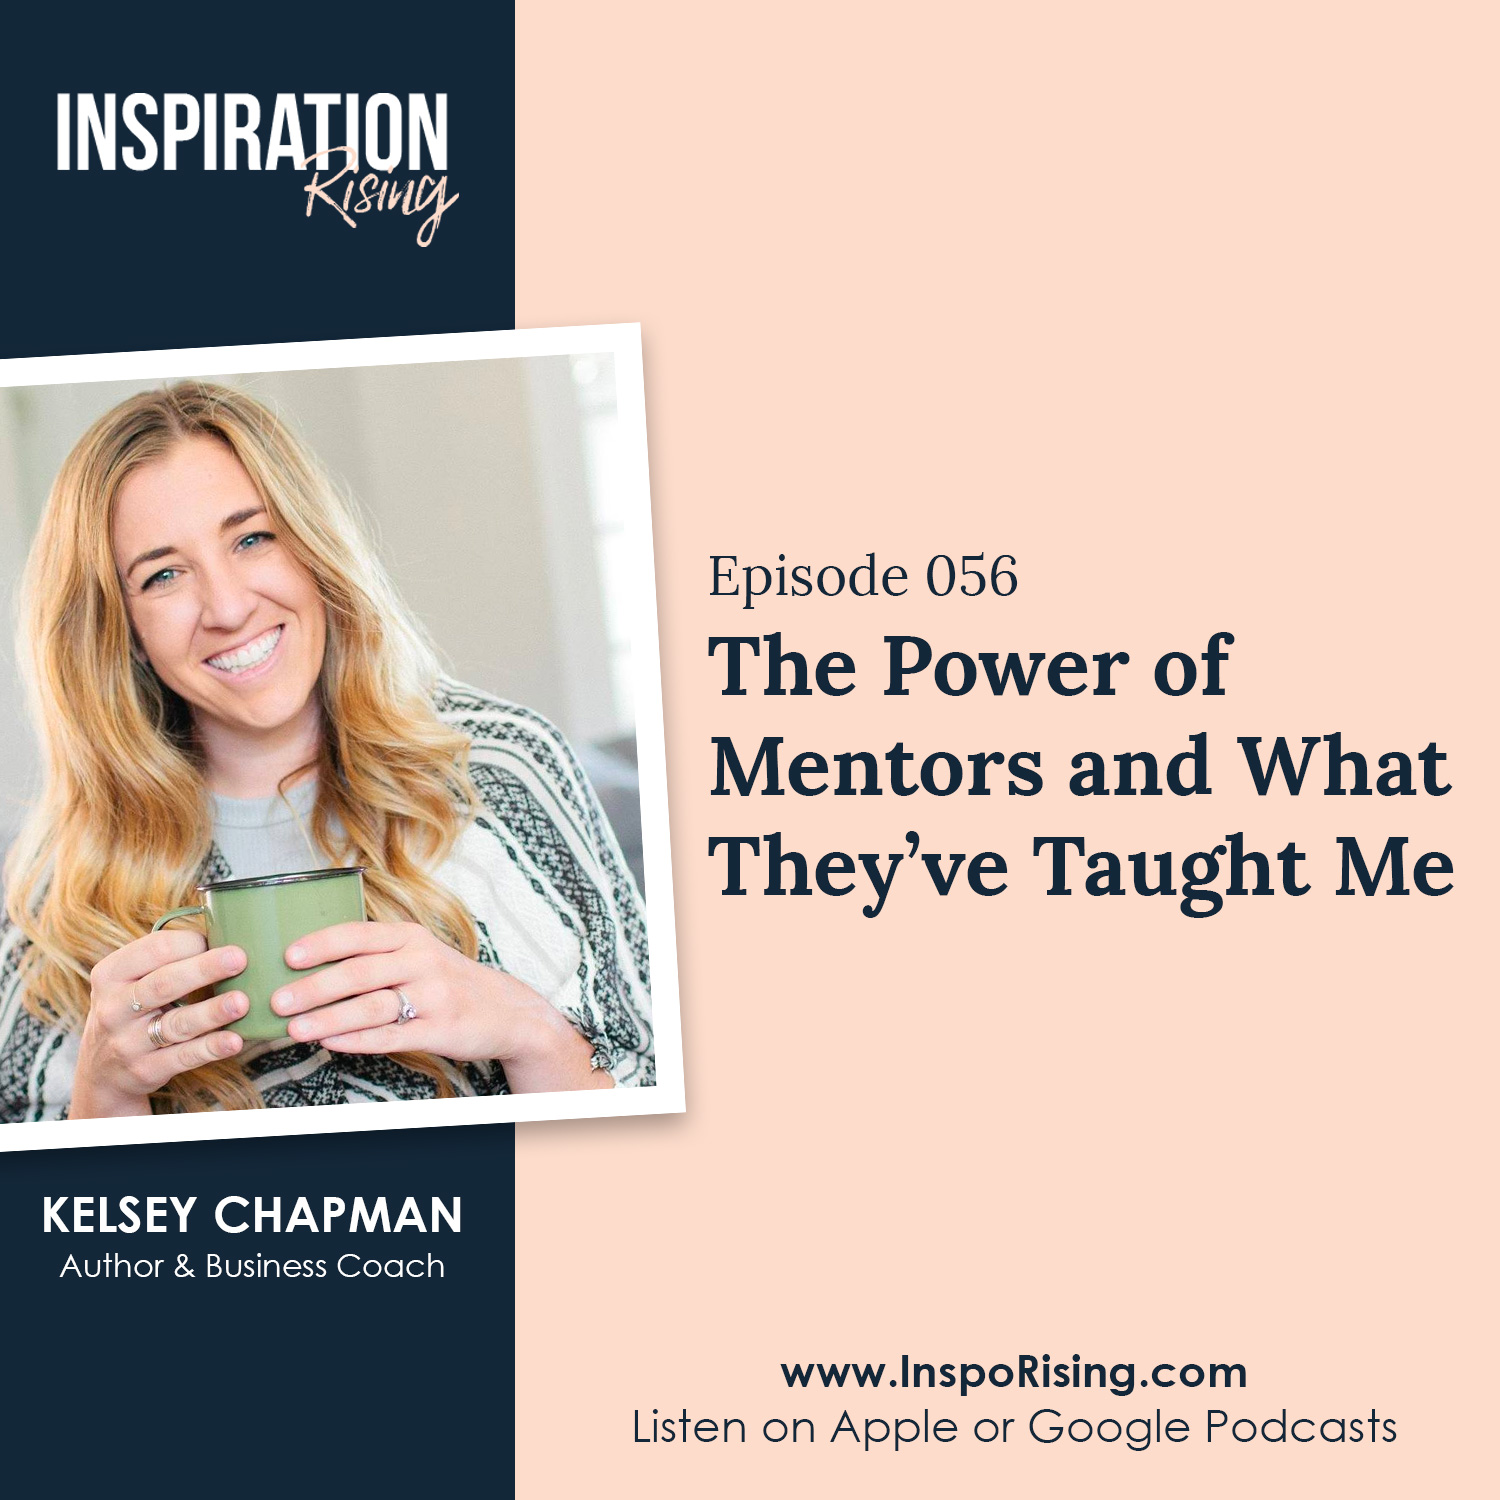 Kelsey Chapman - What They Taught Me